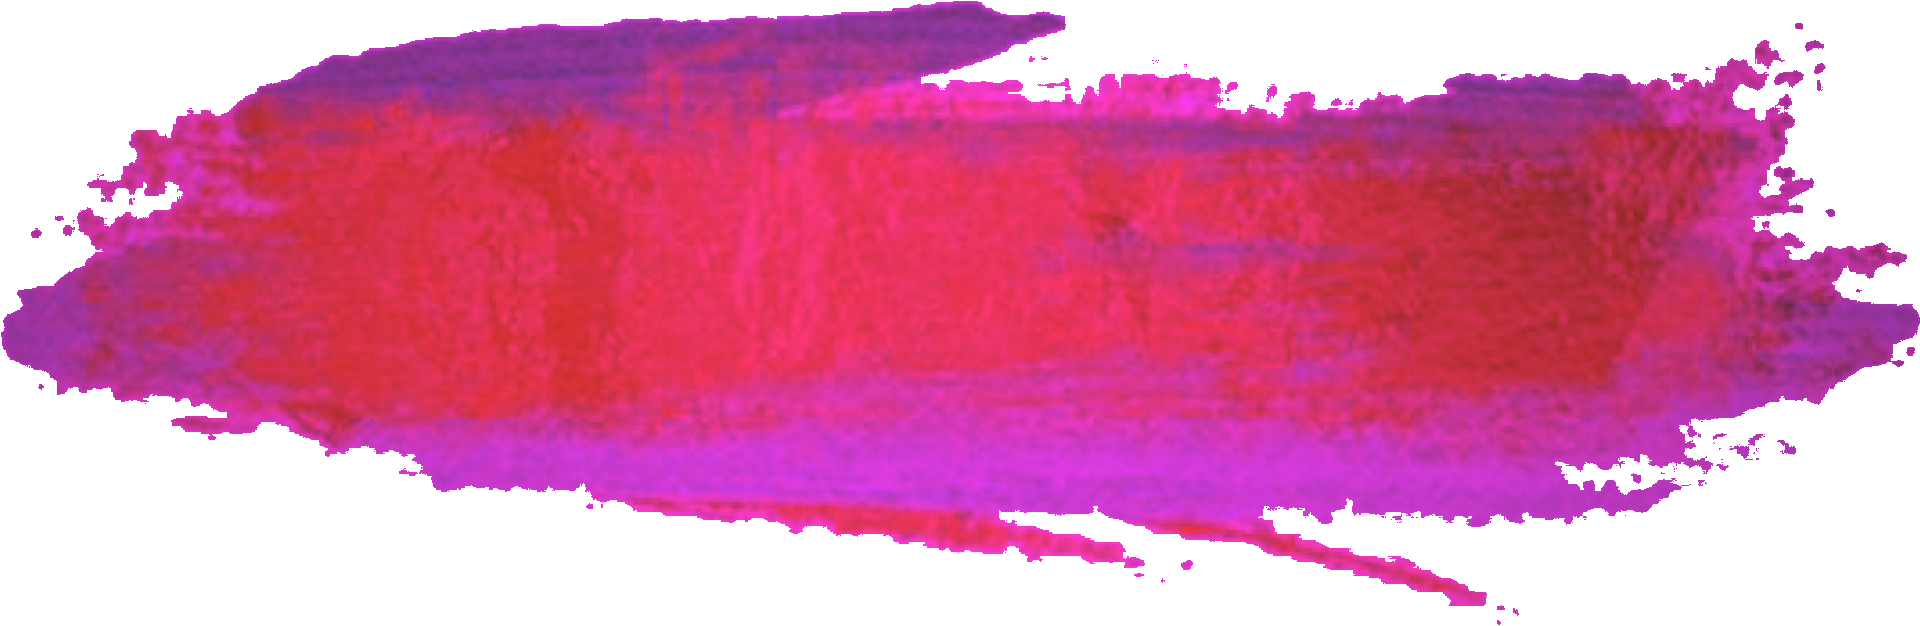 A Pink And Purple Paint Brush Stroke